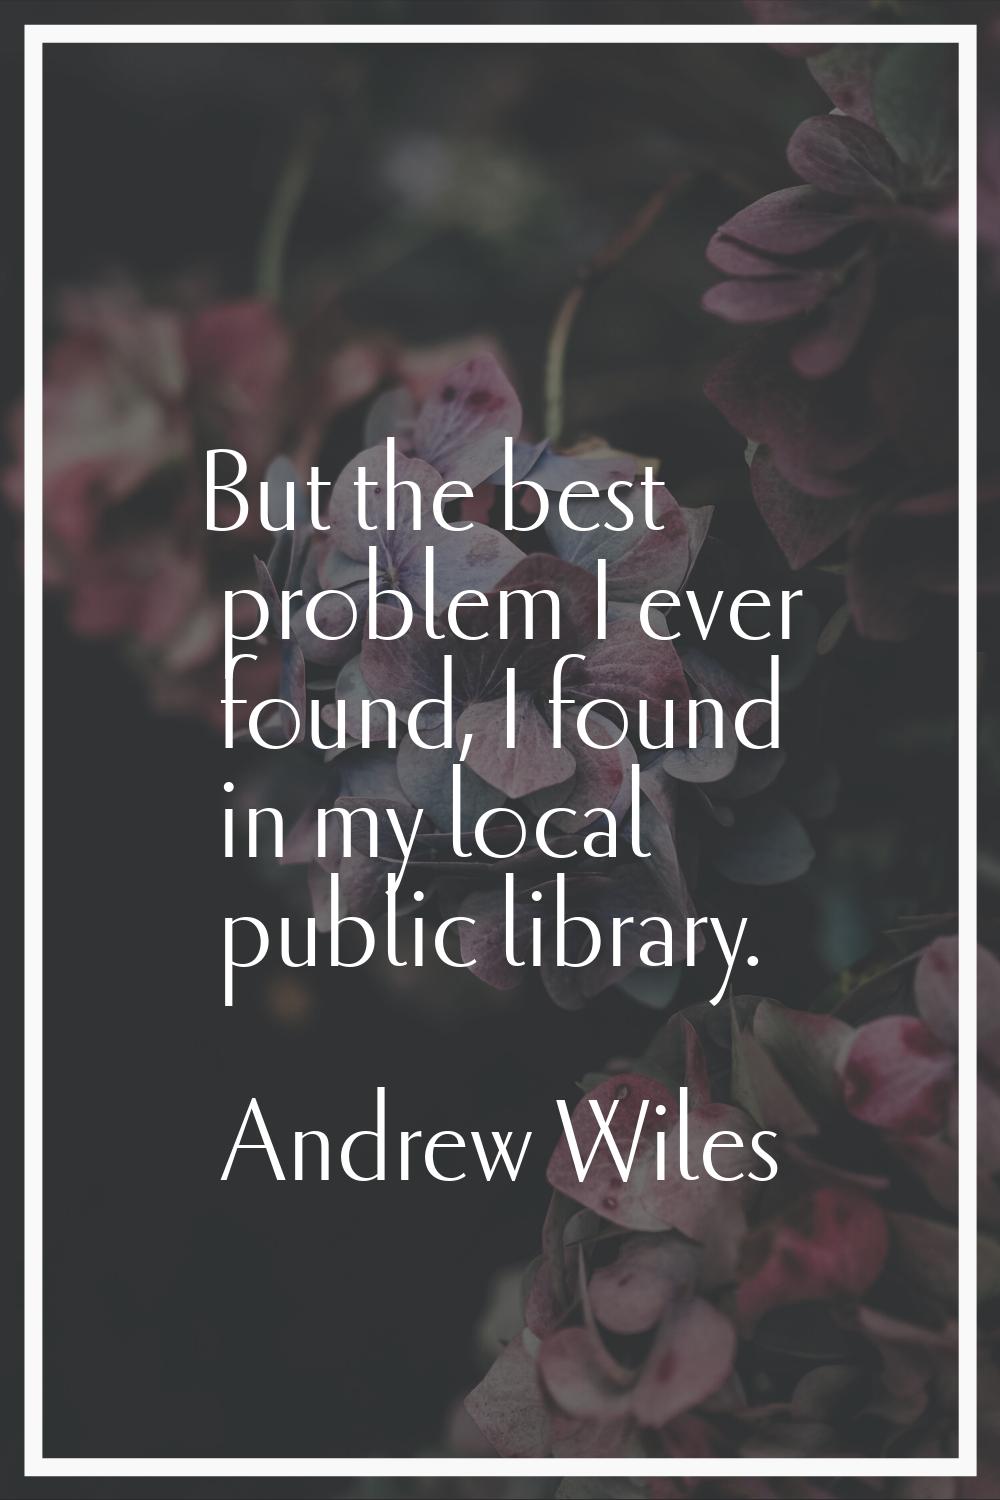 But the best problem I ever found, I found in my local public library.